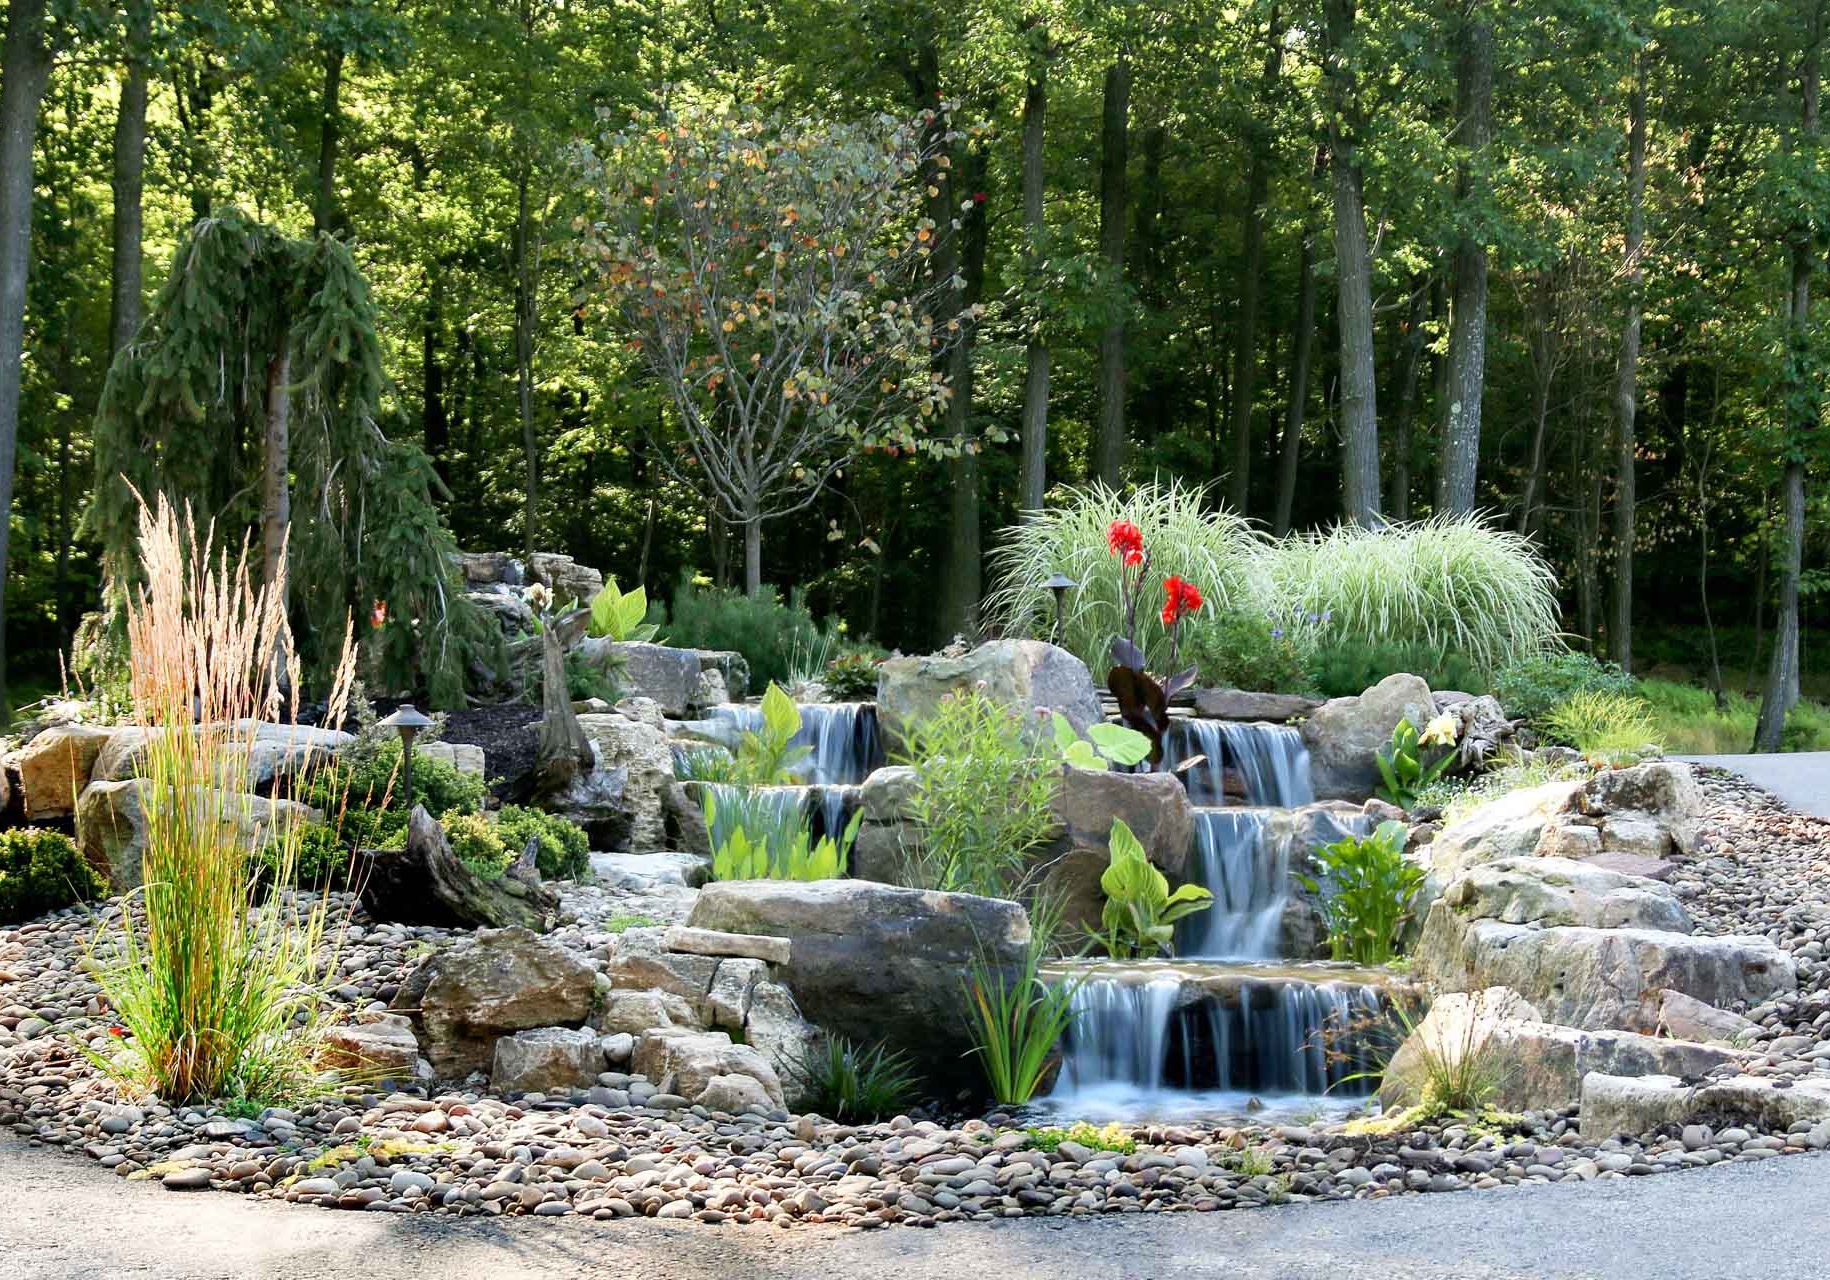 A rock garden with a waterfall in the middle.